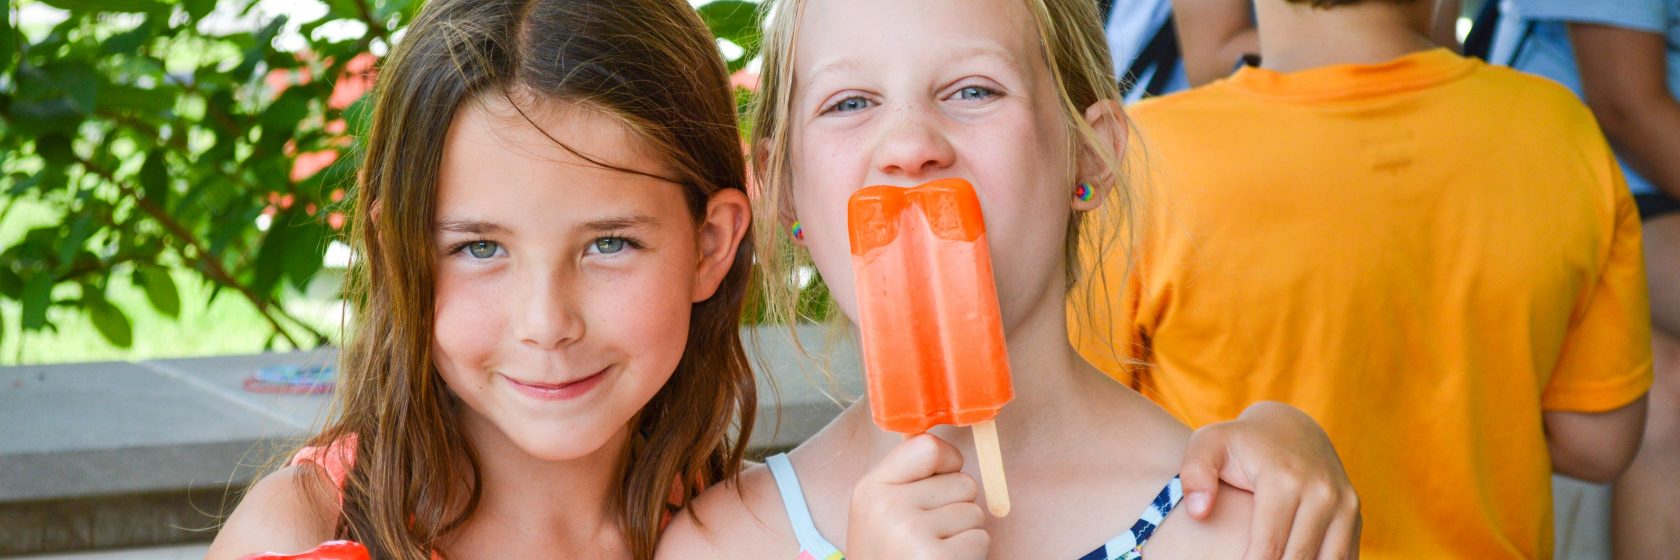 Two girls at camp having ice cream popsicles.